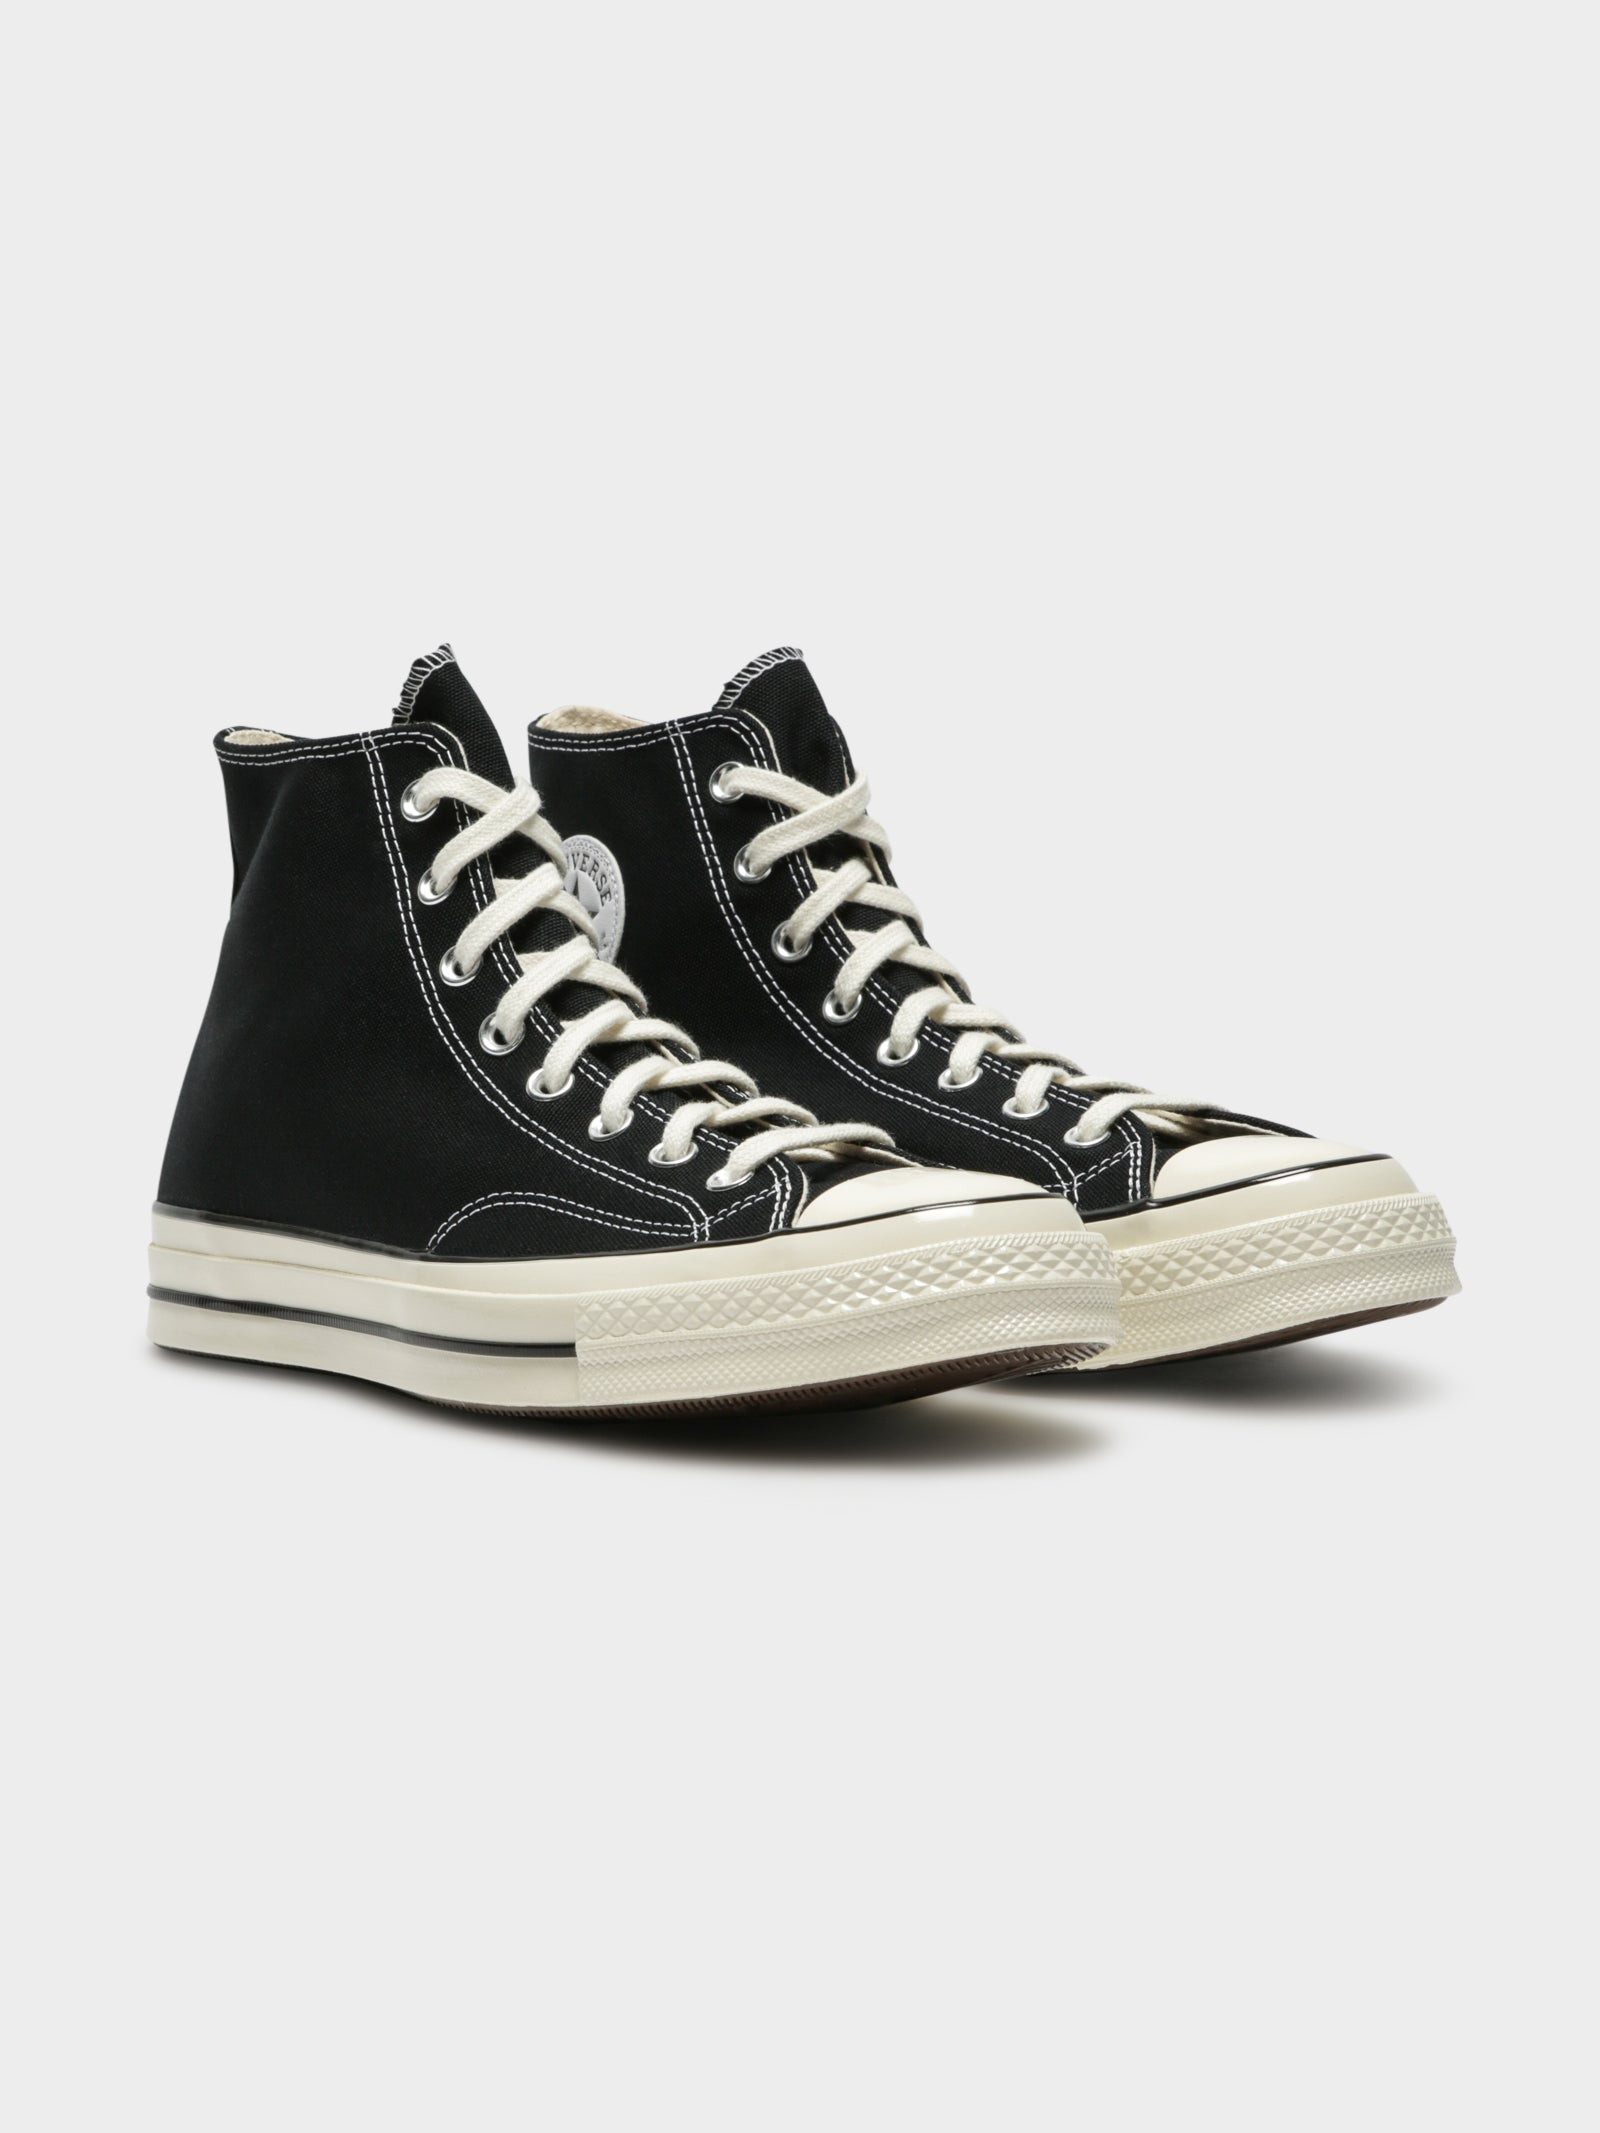 Unisex Taylor All Star 70 High Top Sneakers Black - Glue